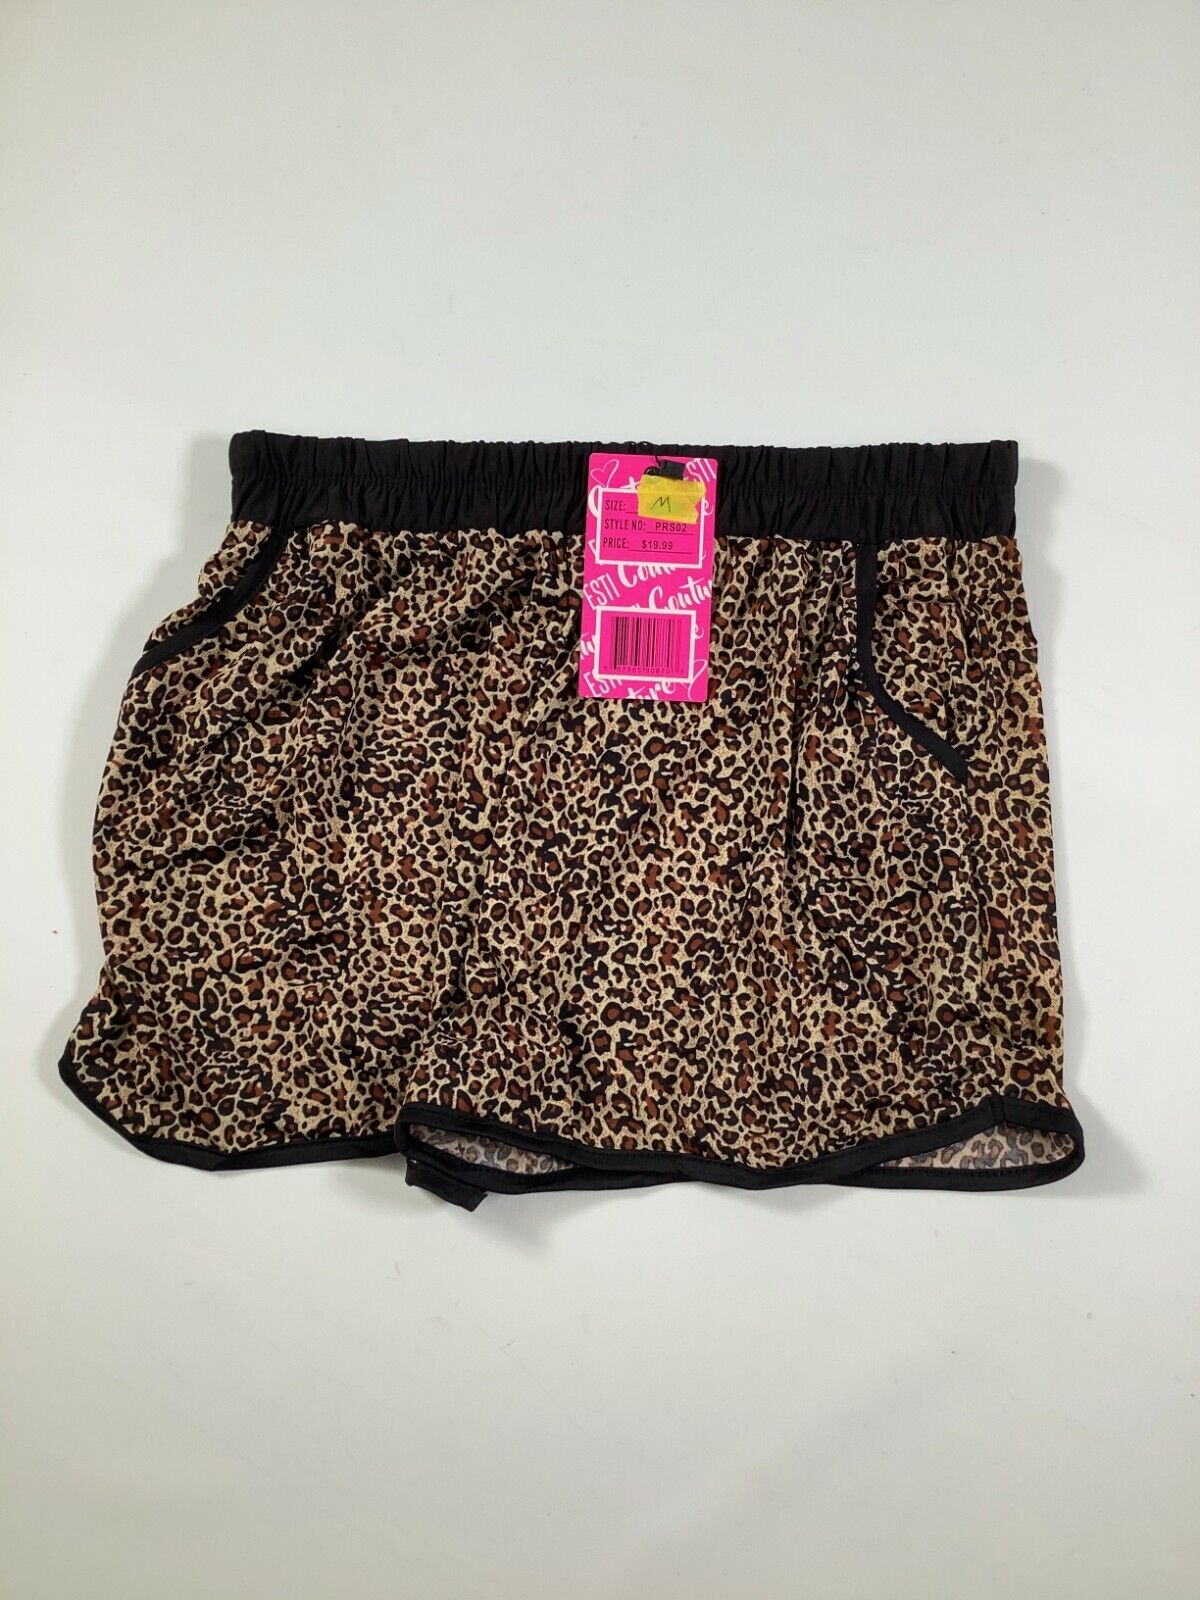 Women’s Esti Couture Sales of SALE items from new works Leopard Print NEW Import Shorts